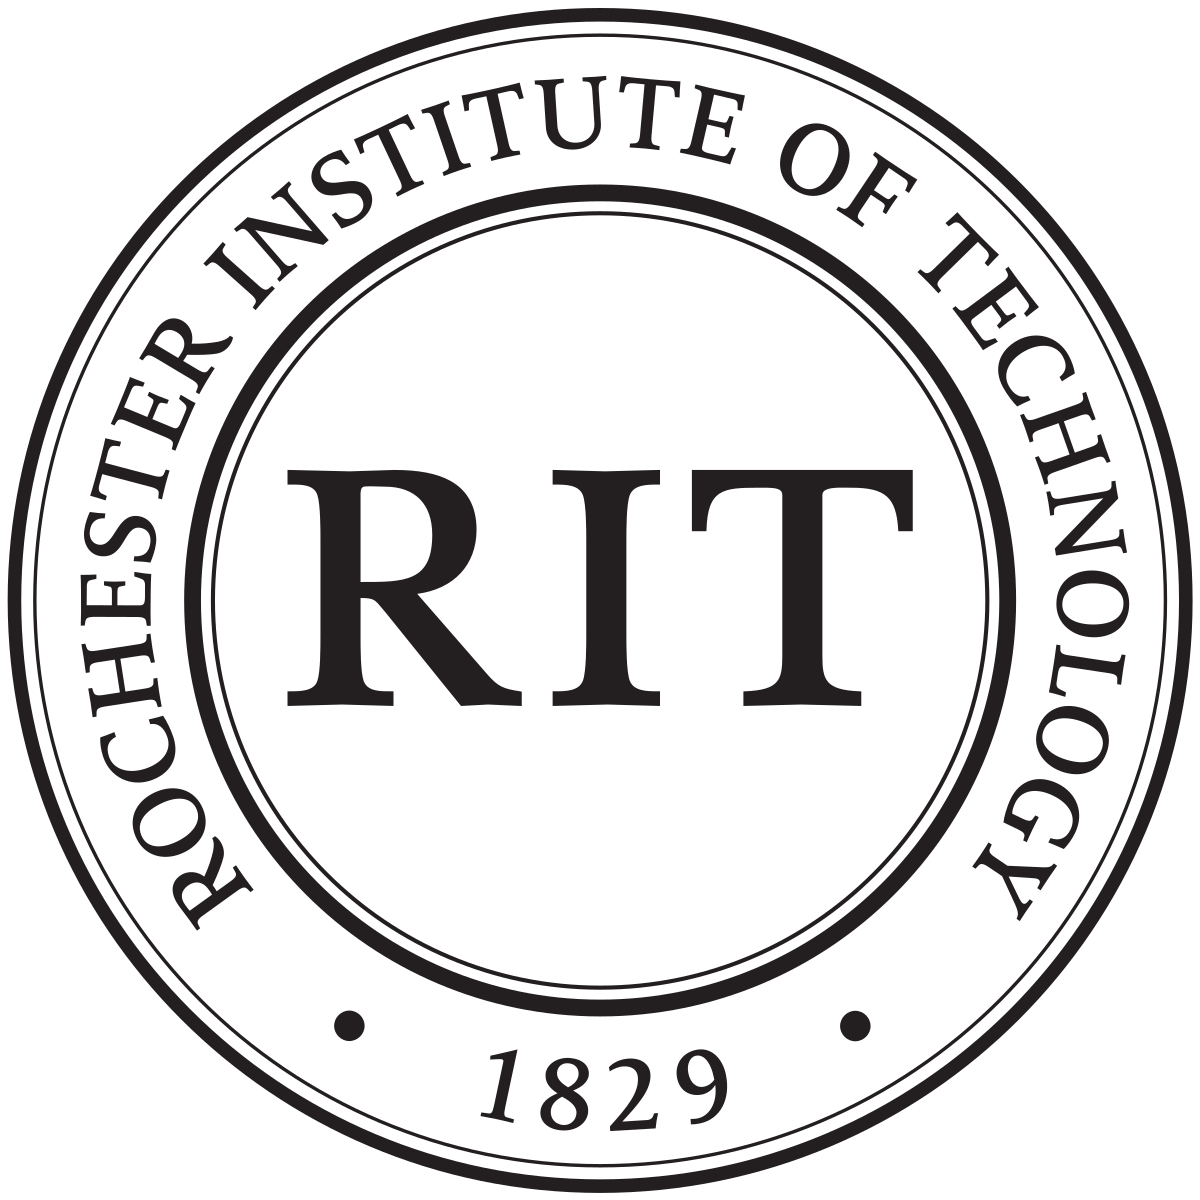 1200px-Rochester_Institute_of_Technology_Seal_(2018).svg.png